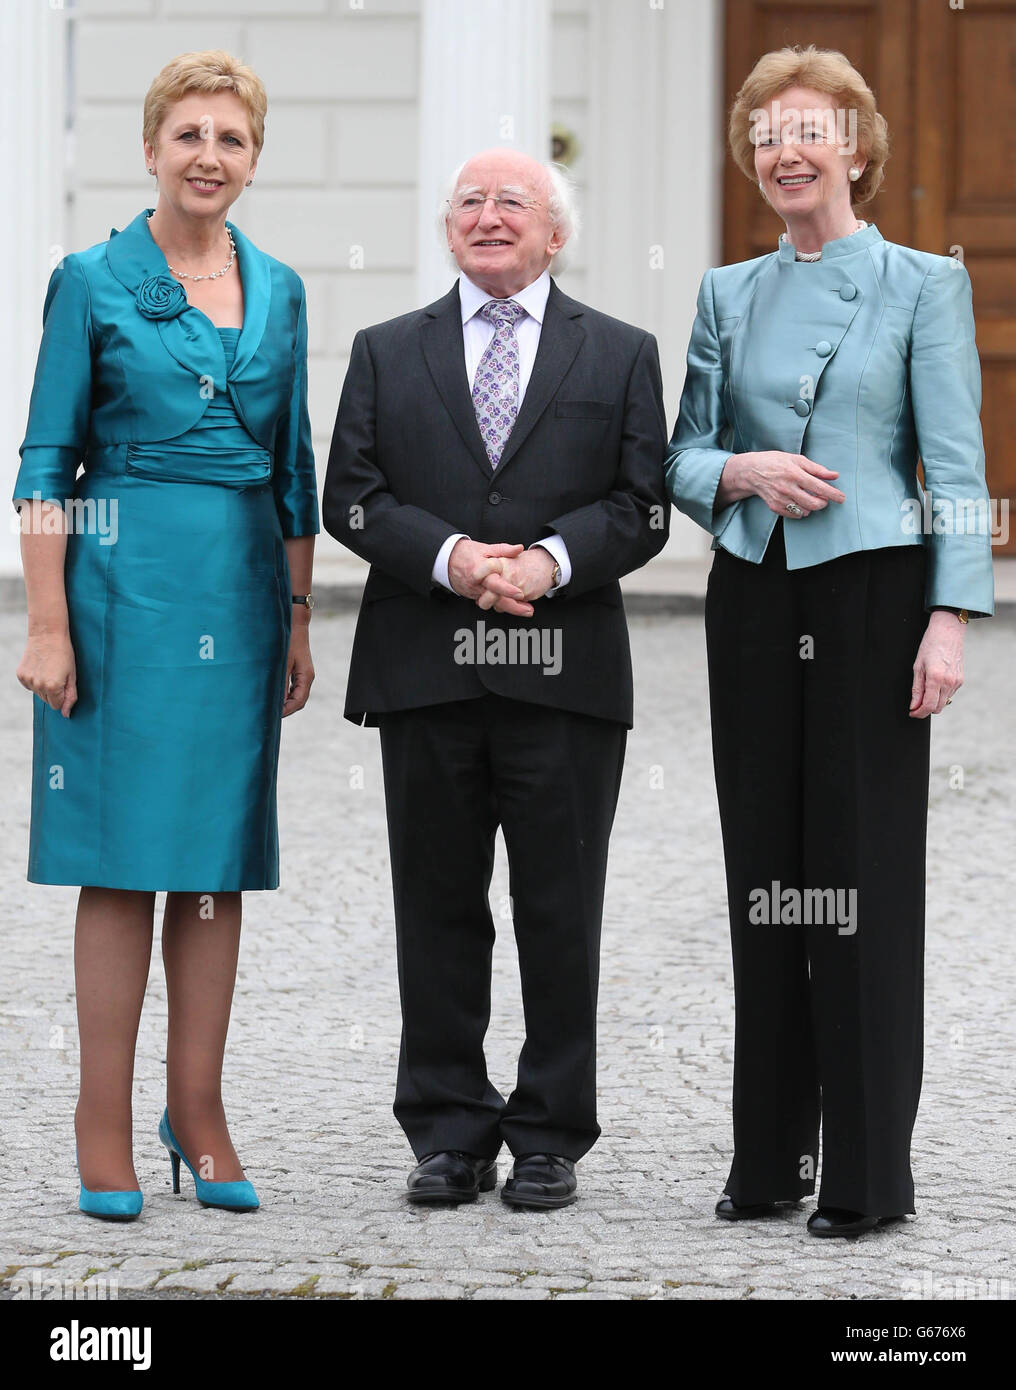 Former presidents Mary McAleese (left) and Mary Robinson (right) join President Michael D Higgins at Iras An Uachtarain for a dinner to commemorate the 75th anniversary of role of the President of Ireland. Stock Photo